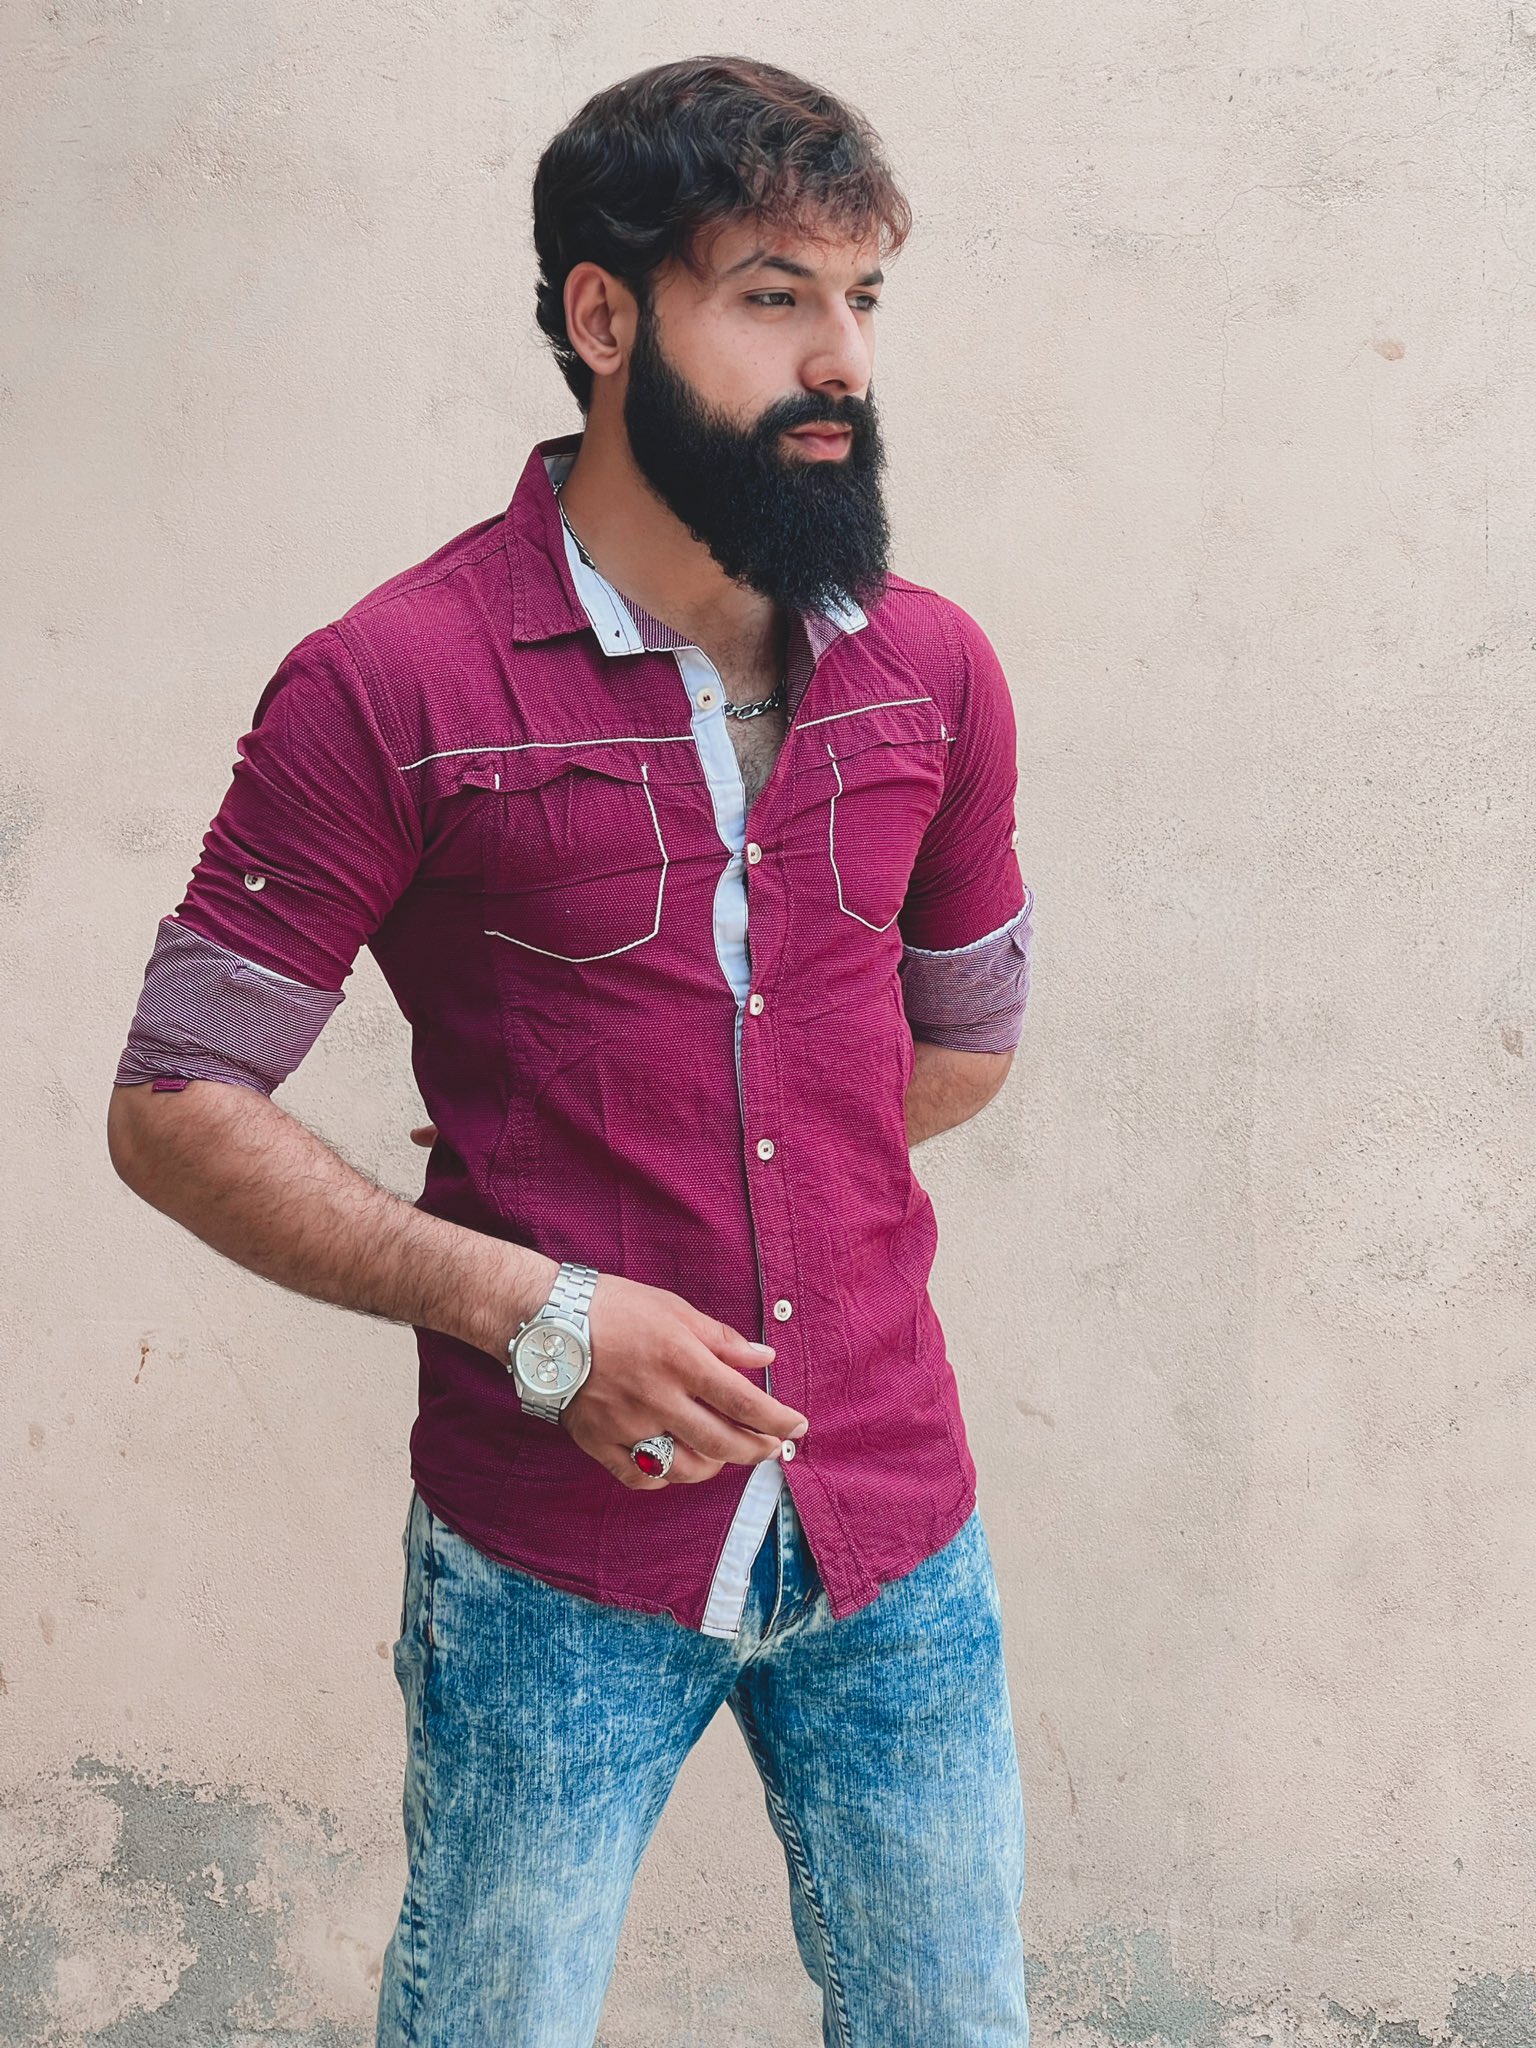 Young Handsome Guy With Hairstyle In Stylish Fashion Denim Clothes With A  Jeans Posing On The Street Stock Photo - Download Image Now - iStock